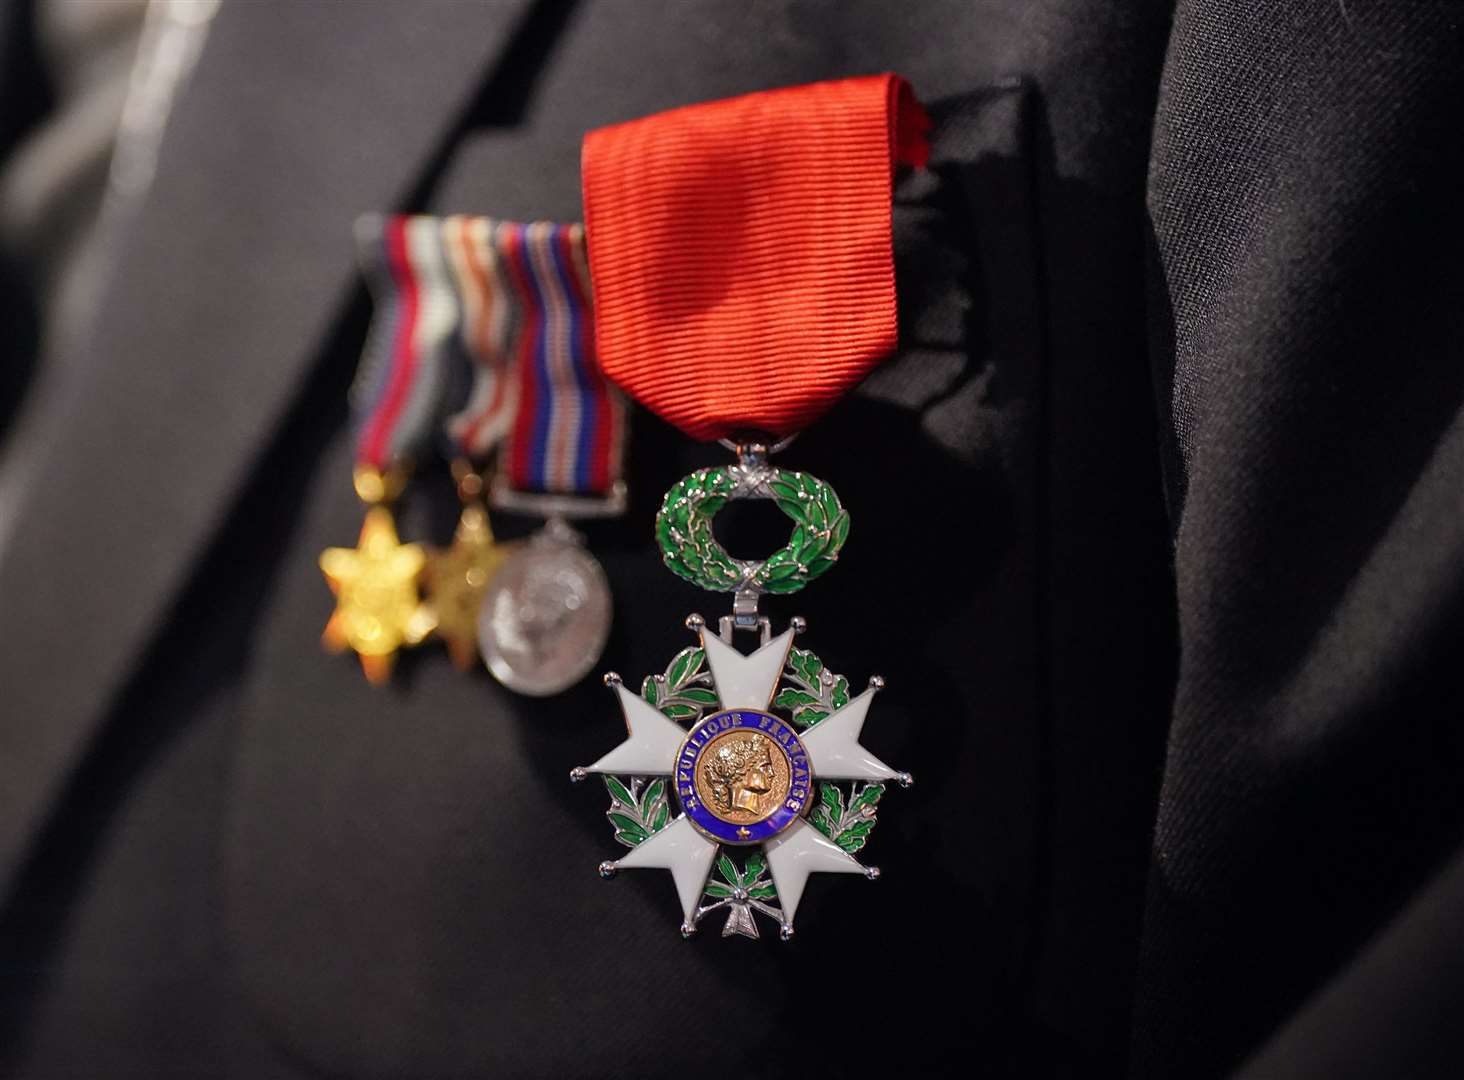 David Morgan proudly displays the Legion of Honour after the ceremony (Yui Mok/PA)